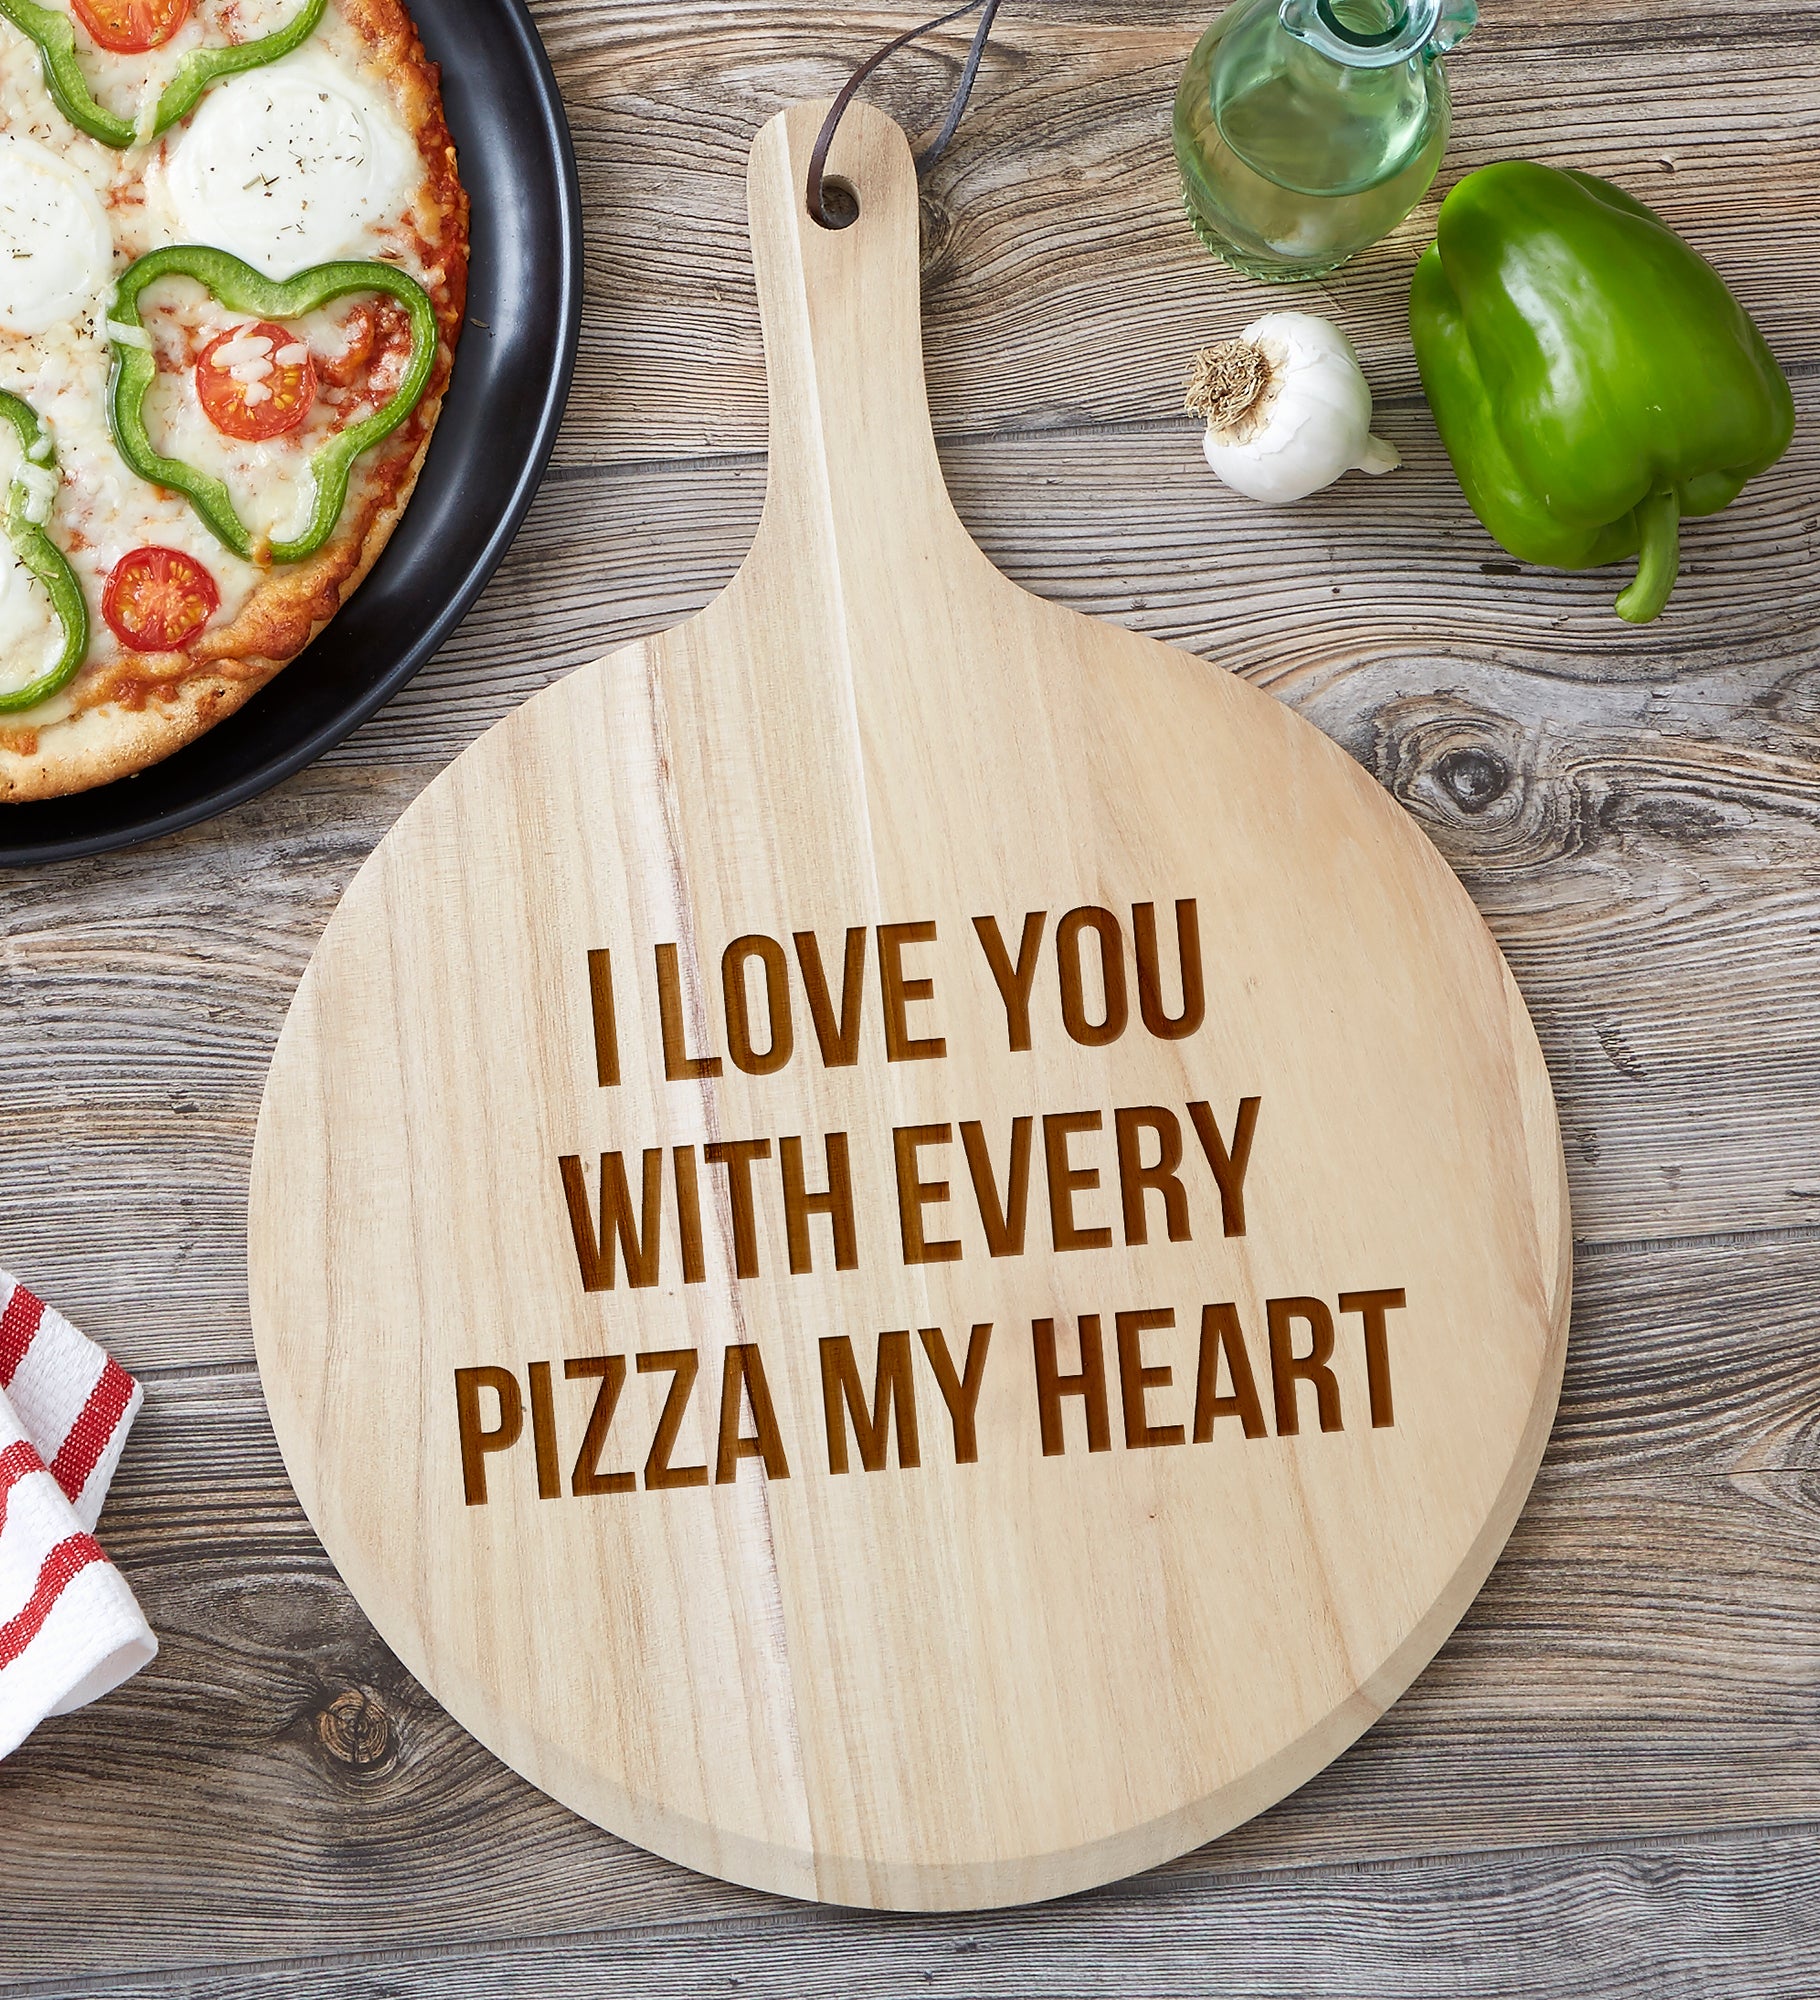 Pizza Expressions Personalized 3pc Pizza Board Gift Set